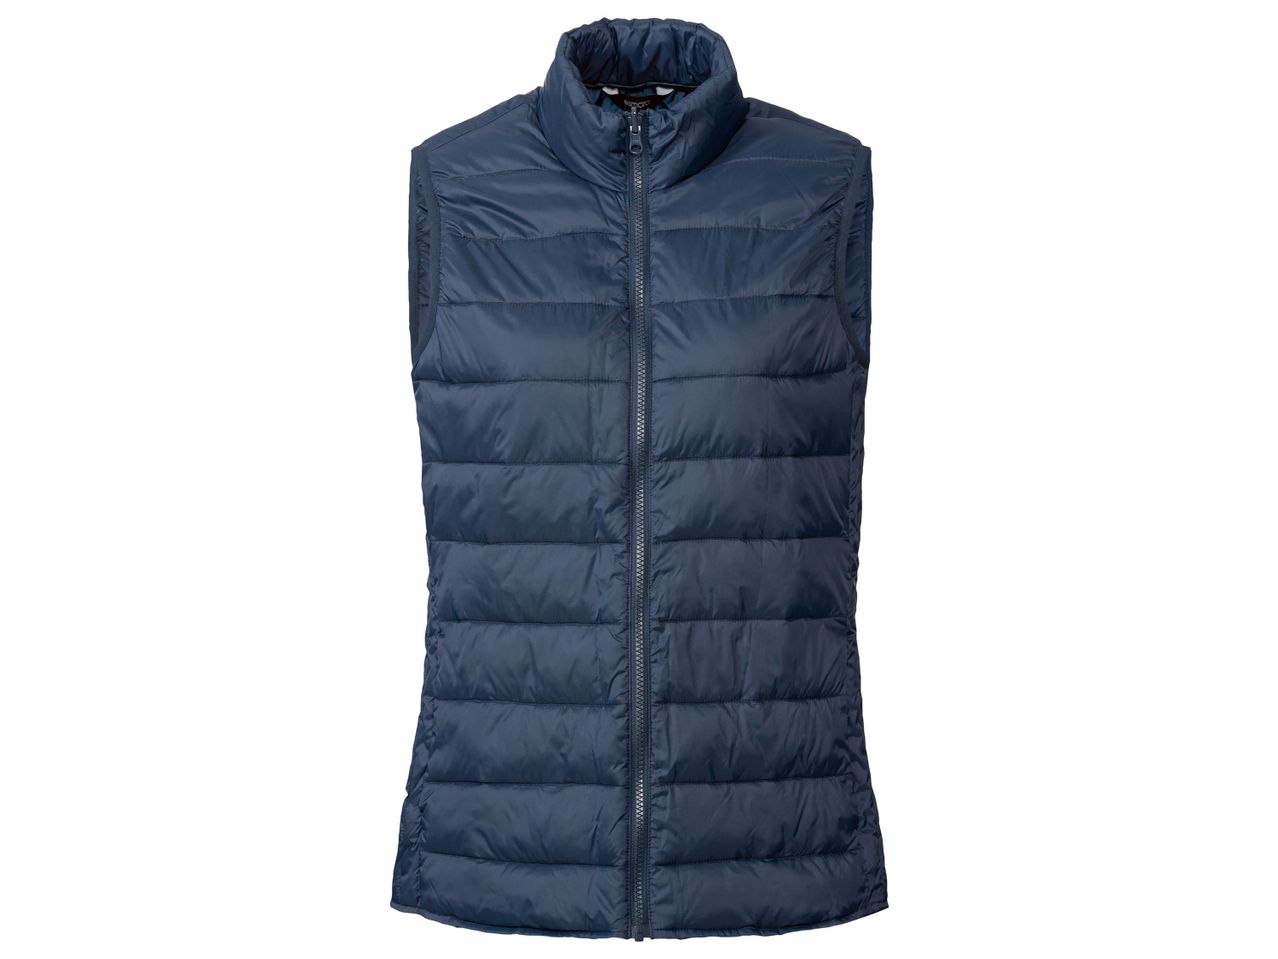 Go to full screen view: Ladies’ Parka with Inner Vest - Image 2